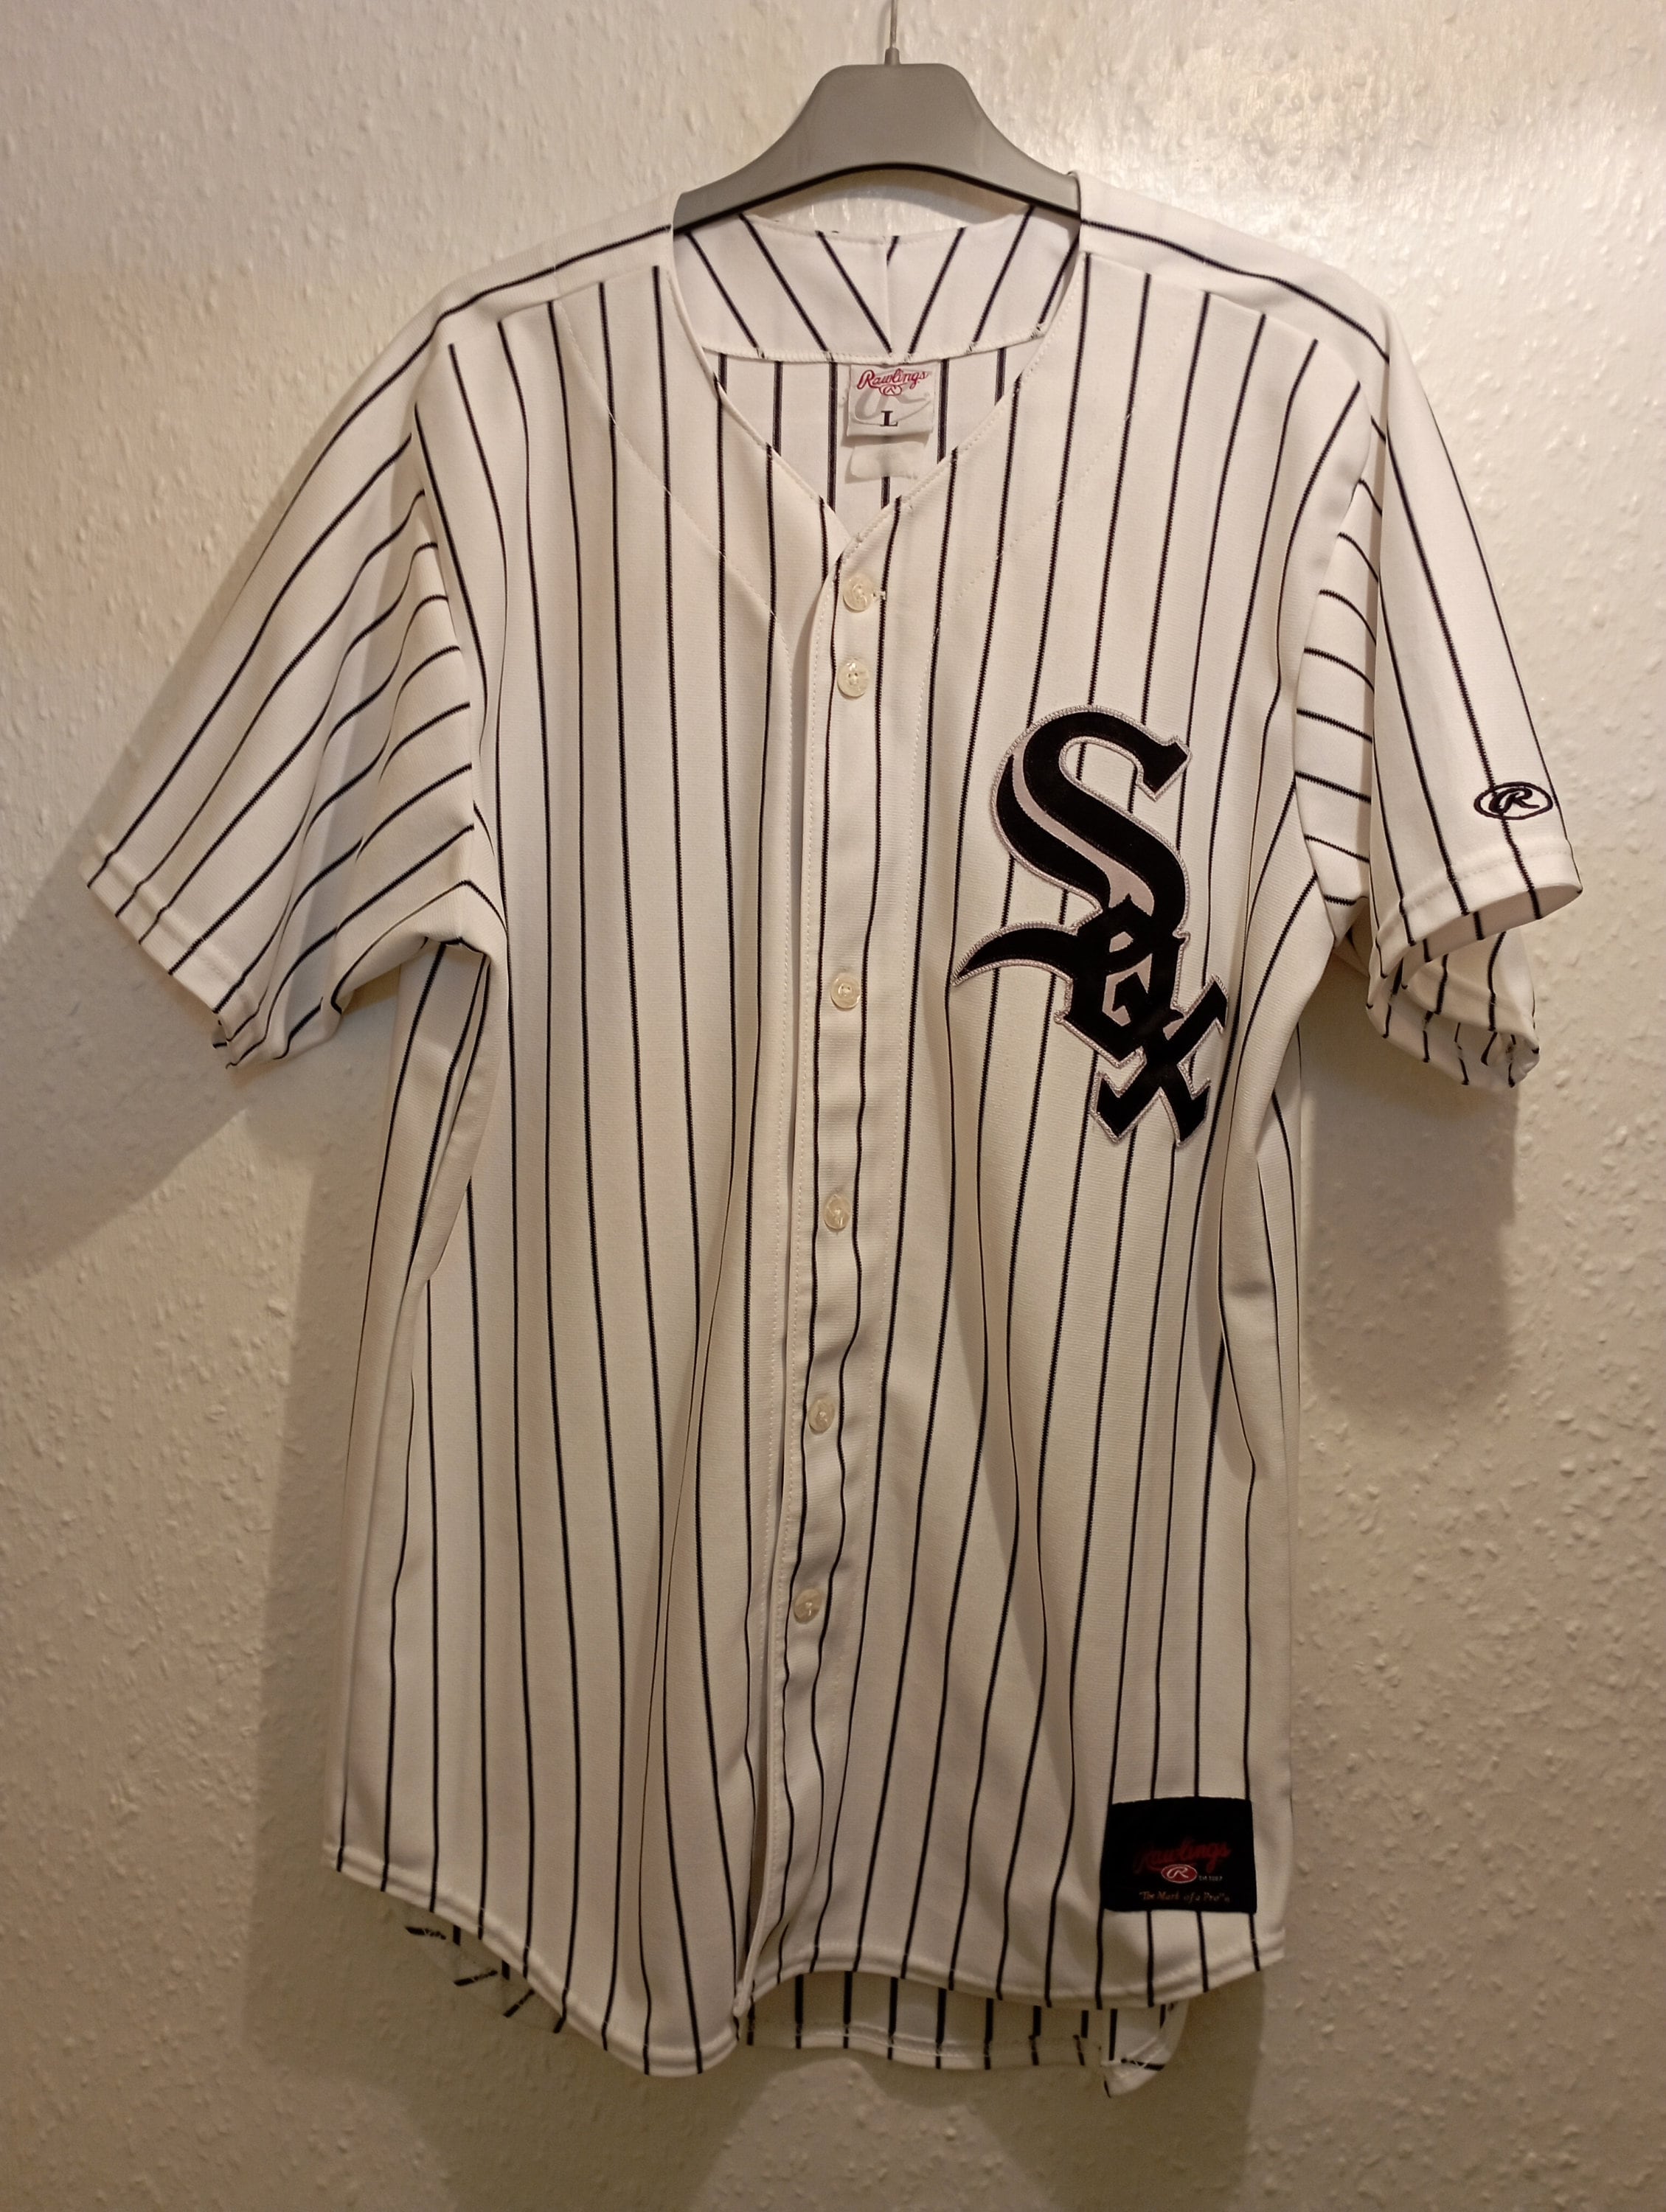 Chicago White Sox Lilo & Stitch Black Custom Number And Name Jersey  Baseball Shirt - Banantees